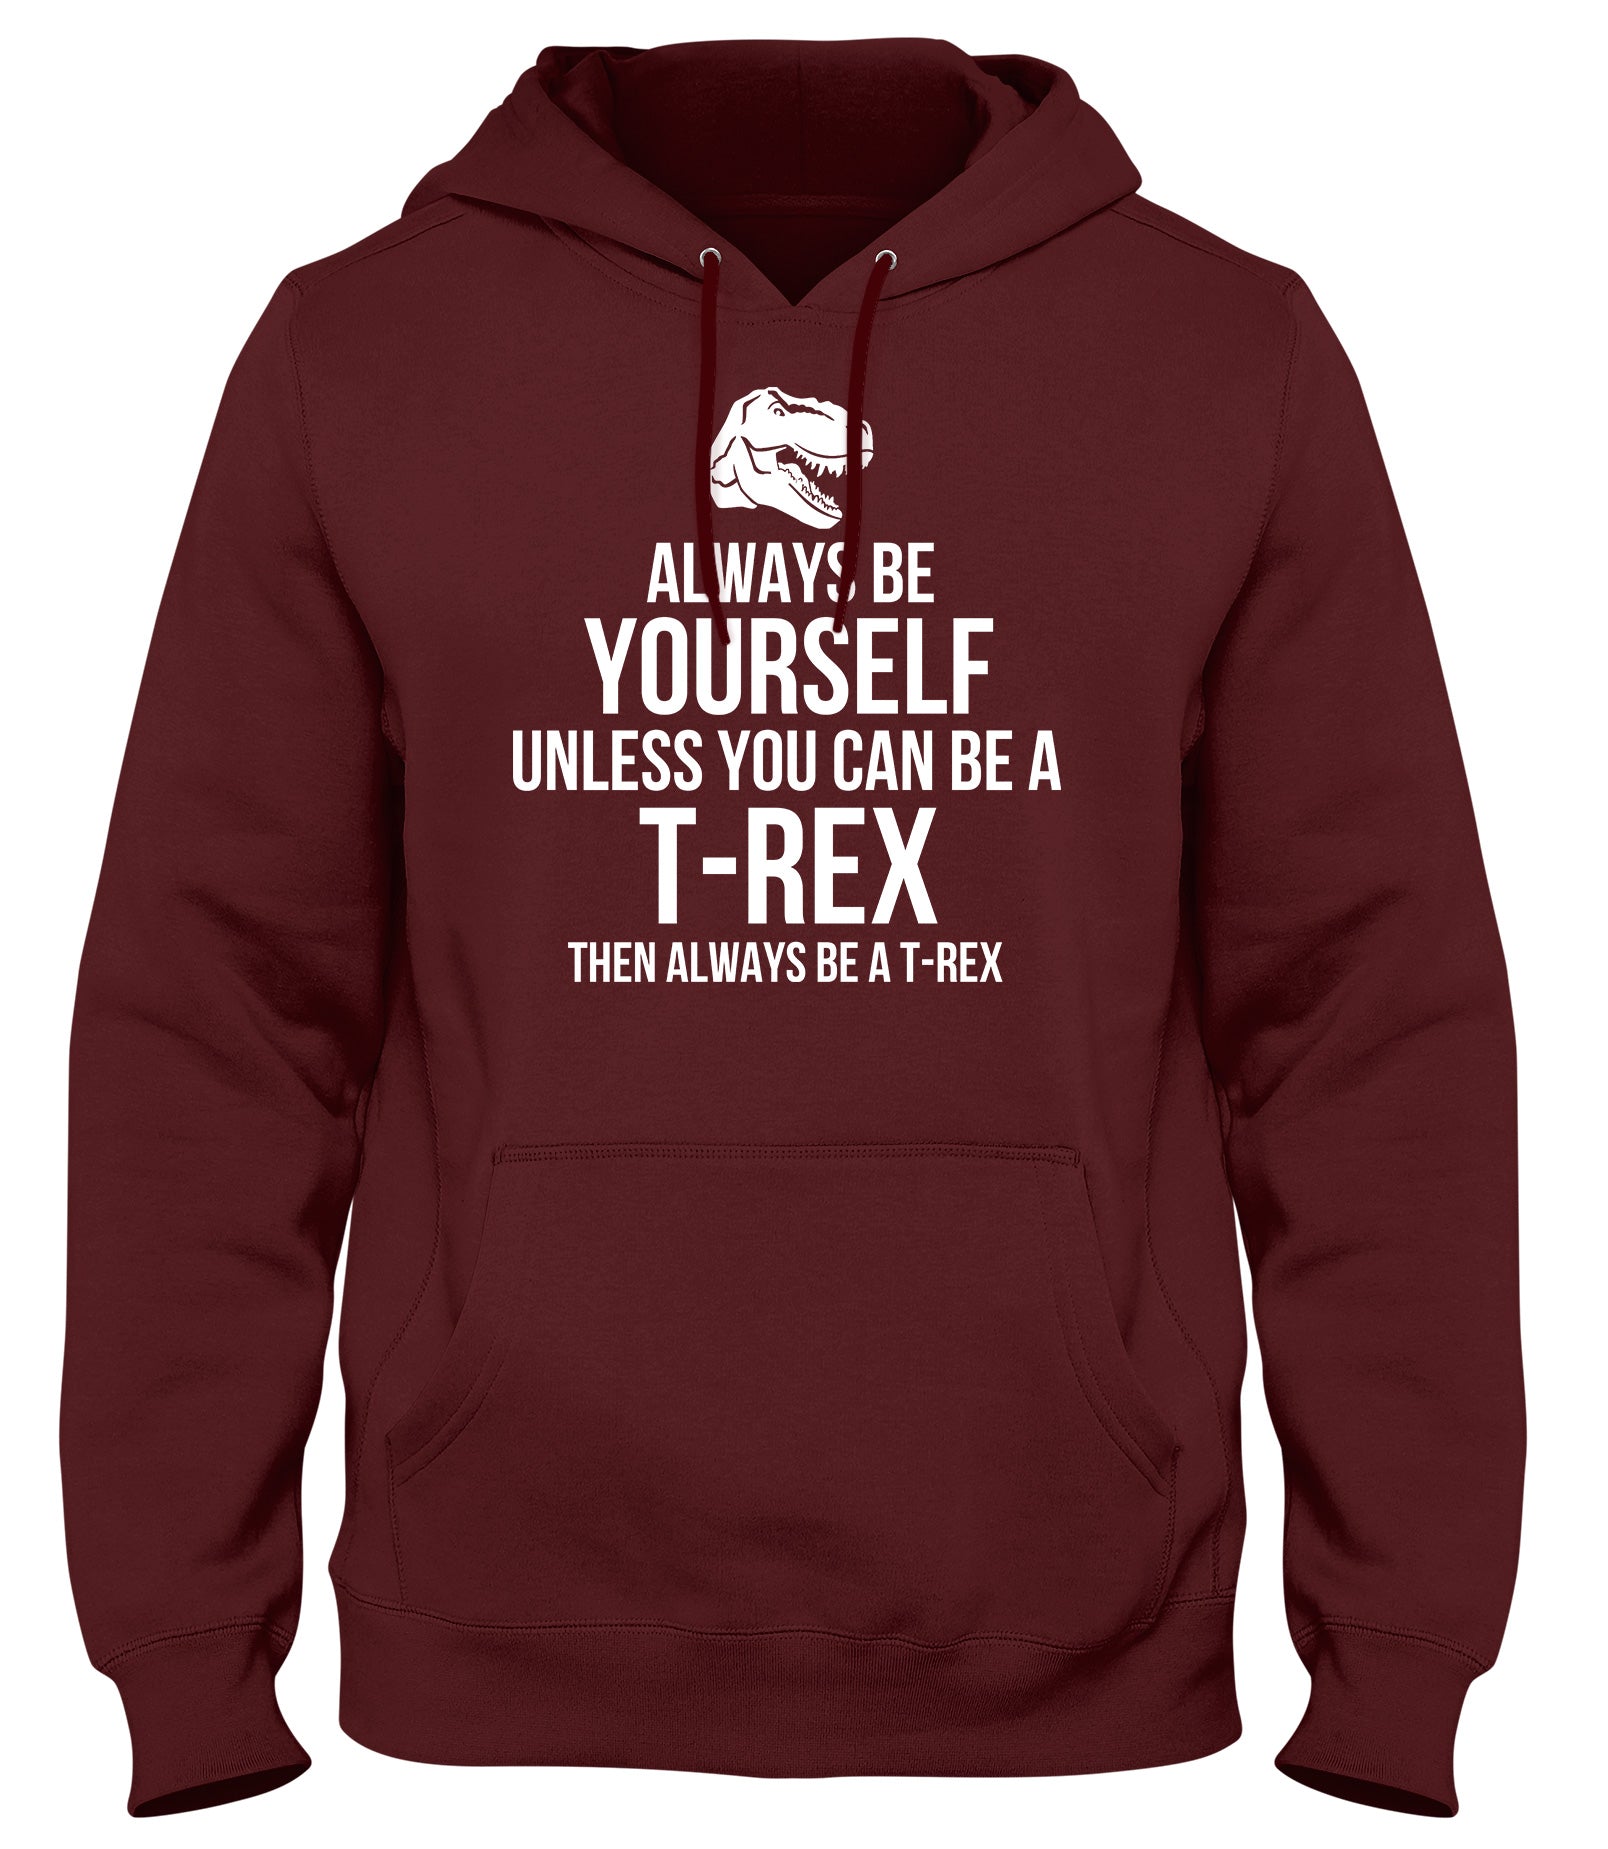 ALWAYS BE YOURSELF UNLESS YOU CAN BE A T-REX THEN ALWAYS BE A T-REX MENS WOMENS LADIES UNISEX FUNNY SLOGAN HOODIE